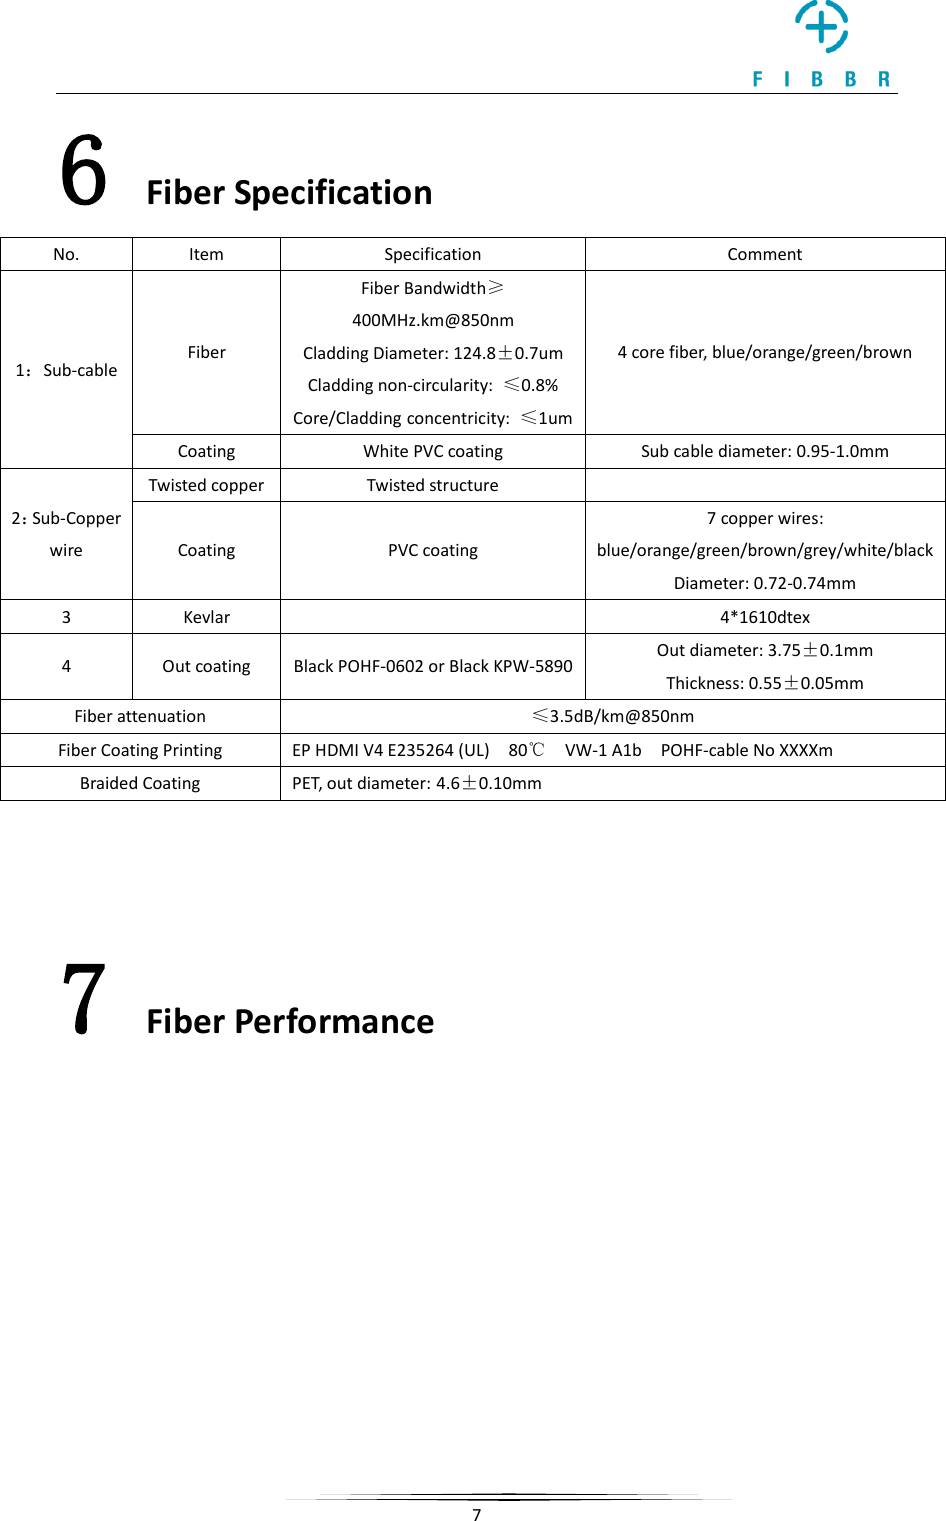     7  6 Fiber Specification No.  Item Specification Comment 1：Sub-cable Fiber Fiber Bandwidth≥400MHz.km@850nm Cladding Diameter: 124.8±0.7um Cladding non-circularity:  ≤0.8% Core/Cladding concentricity:  ≤1um 4 core fiber, blue/orange/green/brown   Coating White PVC coating  Sub cable diameter: 0.95-1.0mm   2：Sub-Copper wire Twisted copper  Twisted structure   Coating PVC coating 7 copper wires: blue/orange/green/brown/grey/white/black Diameter: 0.72-0.74mm 3  Kevlar    4*1610dtex 4  Out coating Black POHF-0602 or Black KPW-5890  Out diameter: 3.75±0.1mm Thickness: 0.55±0.05mm Fiber attenuation ≤3.5dB/km@850nm Fiber Coating Printing EP HDMI V4 E235264 (UL)    80℃  VW-1 A1b  POHF-cable No XXXXm Braided Coating PET, out diameter: 4.6±0.10mm   7 Fiber Performance  